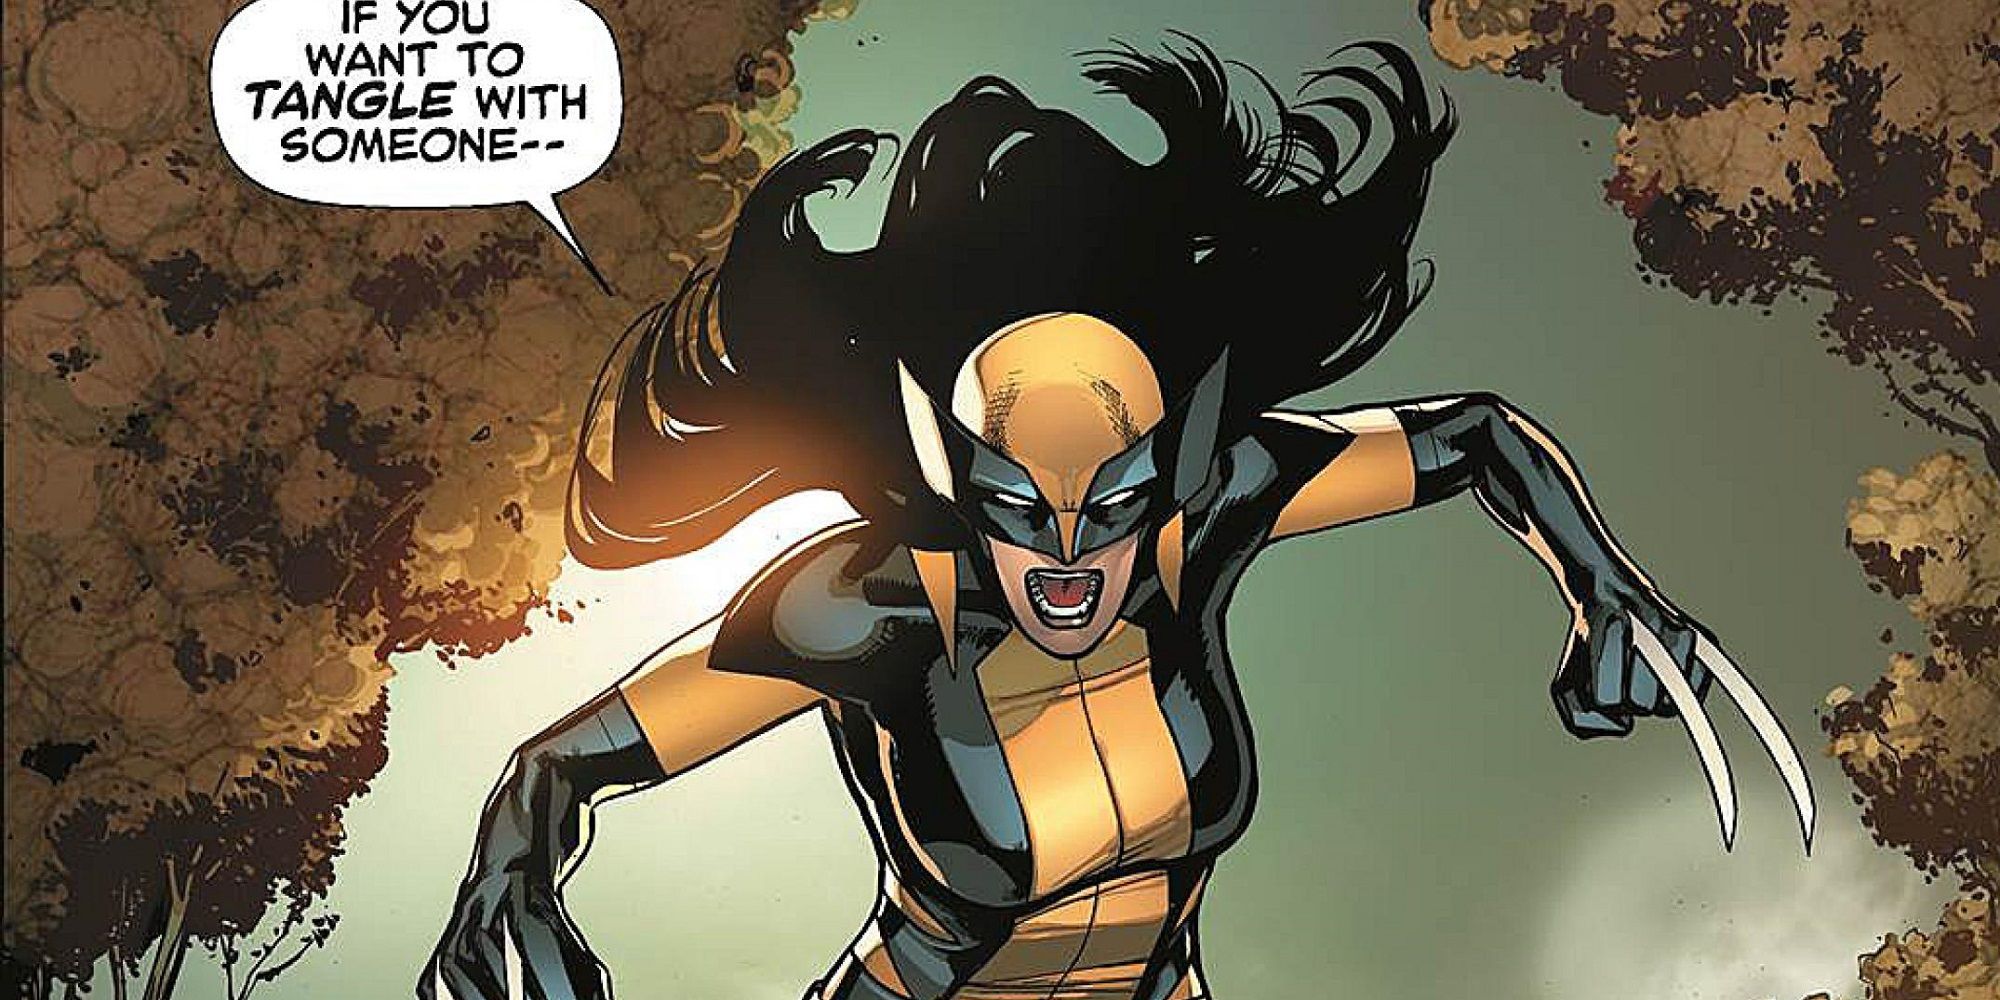 X-23 as the new female Wolverine